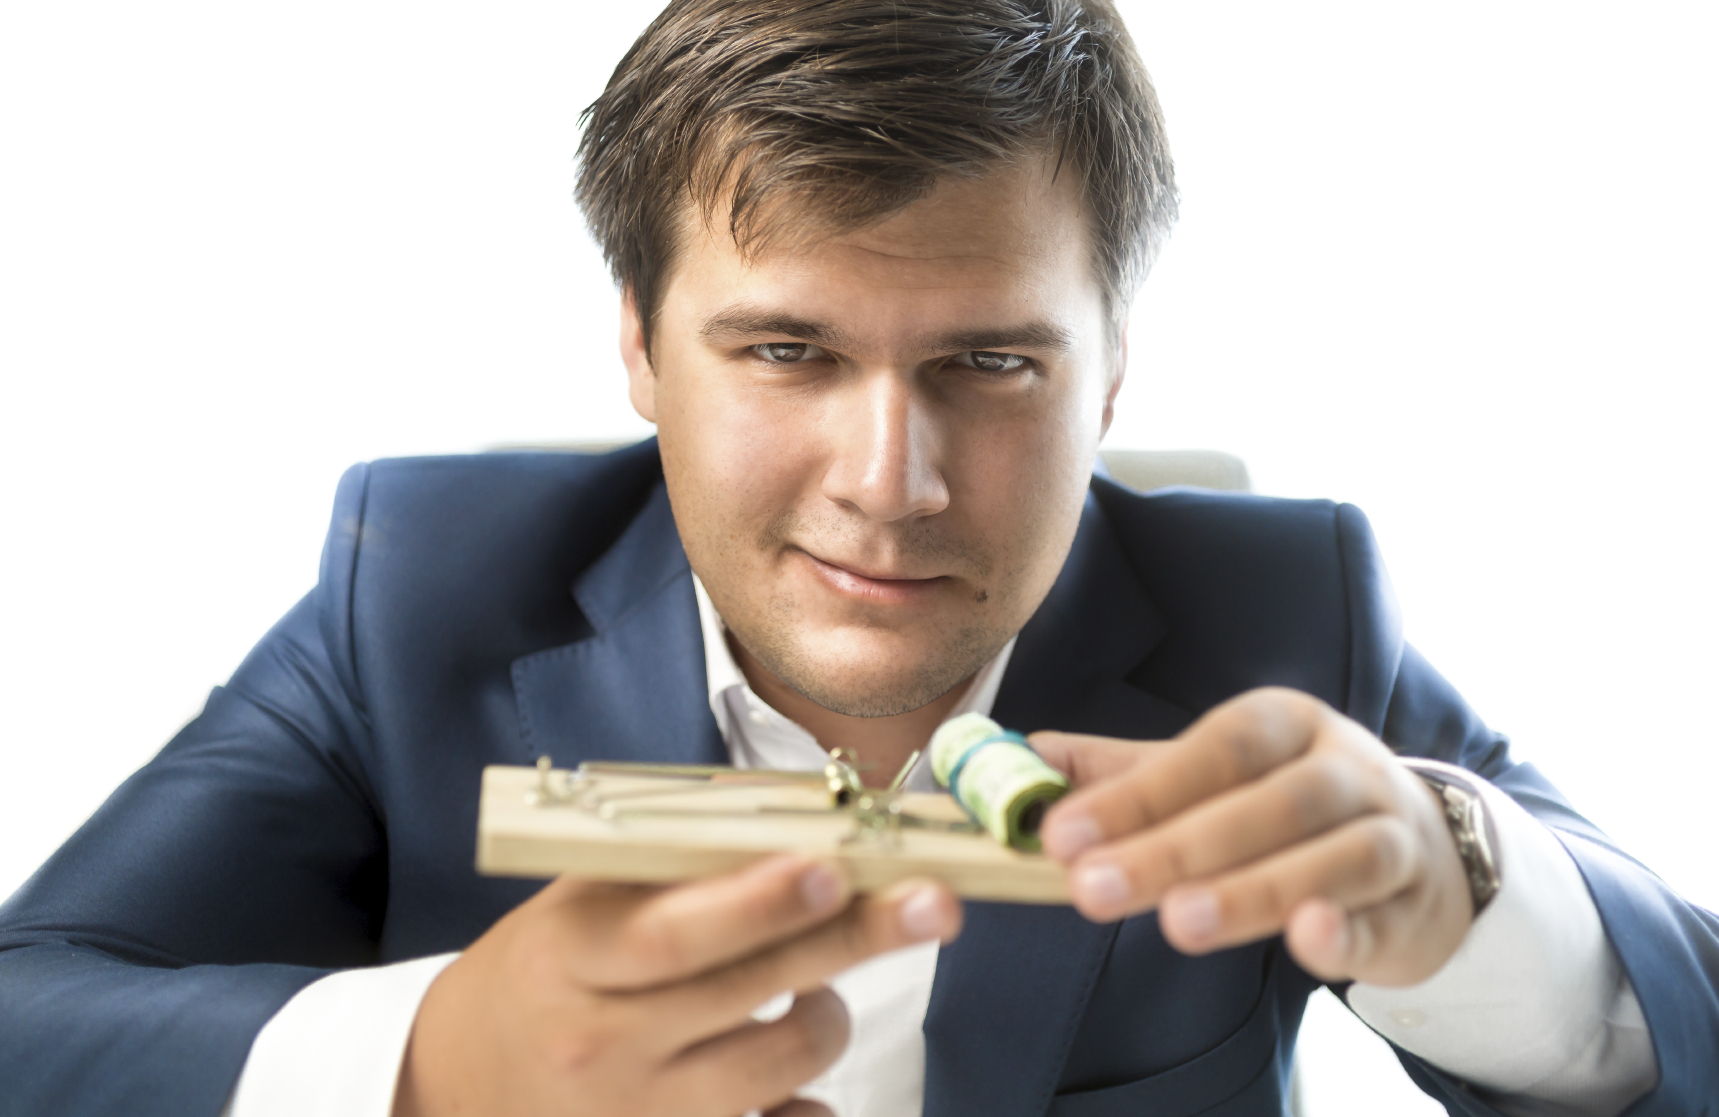 banker offering risky investment. Man holding mousetrap with mon